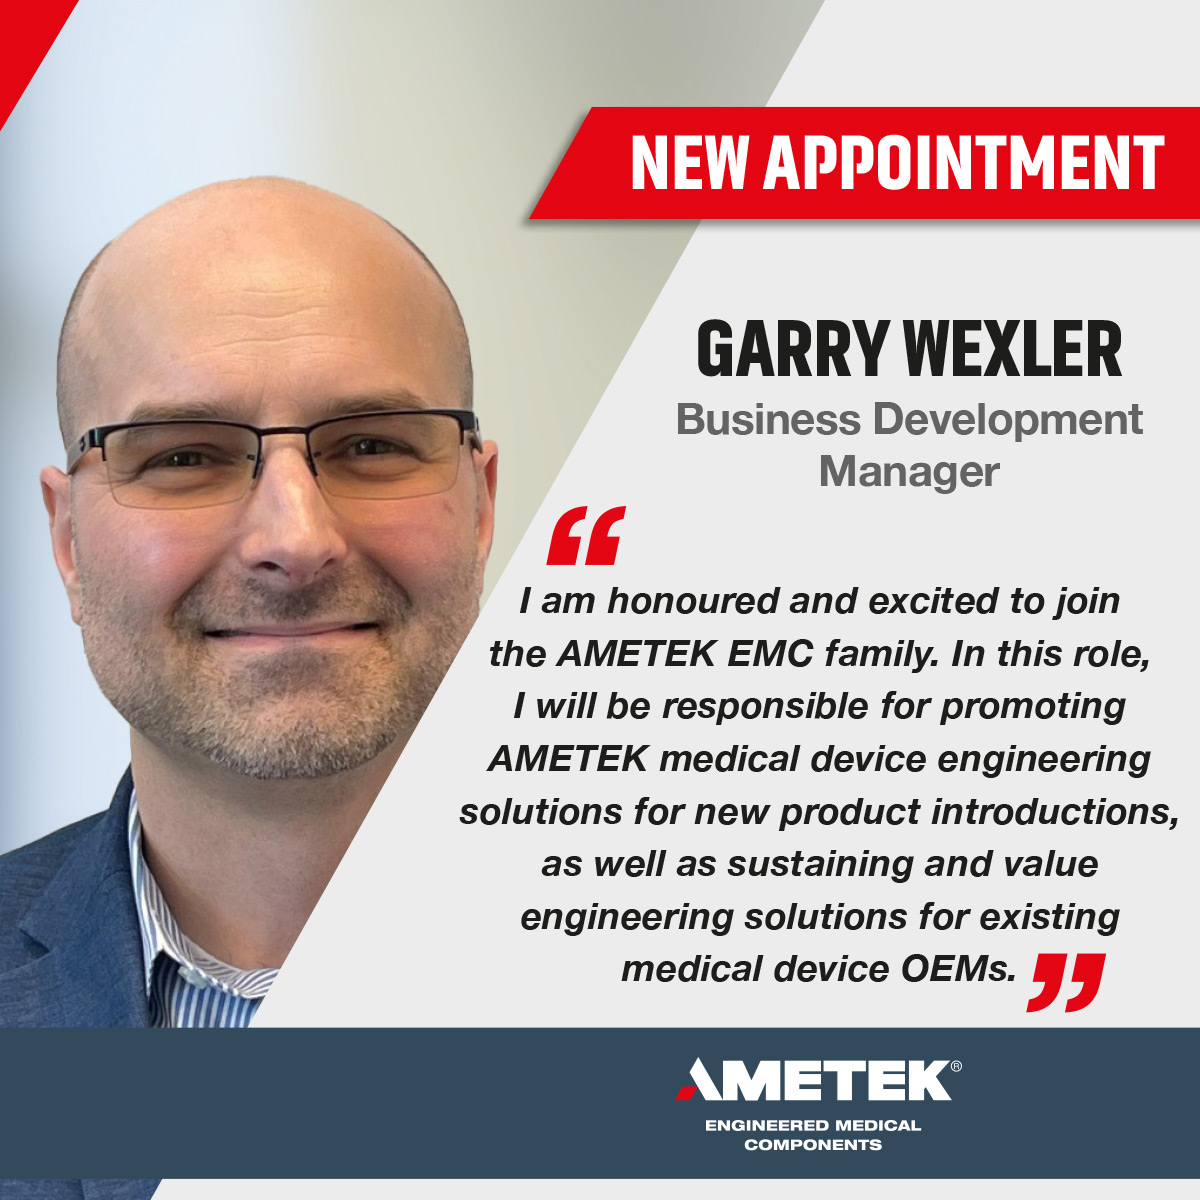 📣 New Appointment 💥

We are happy to welcome Garry Wexler as a Business Development Manager

Please join me in welcoming Garry 👏

#Ametek #Newappointment #GrowingTeam #Busniess Development #Manager